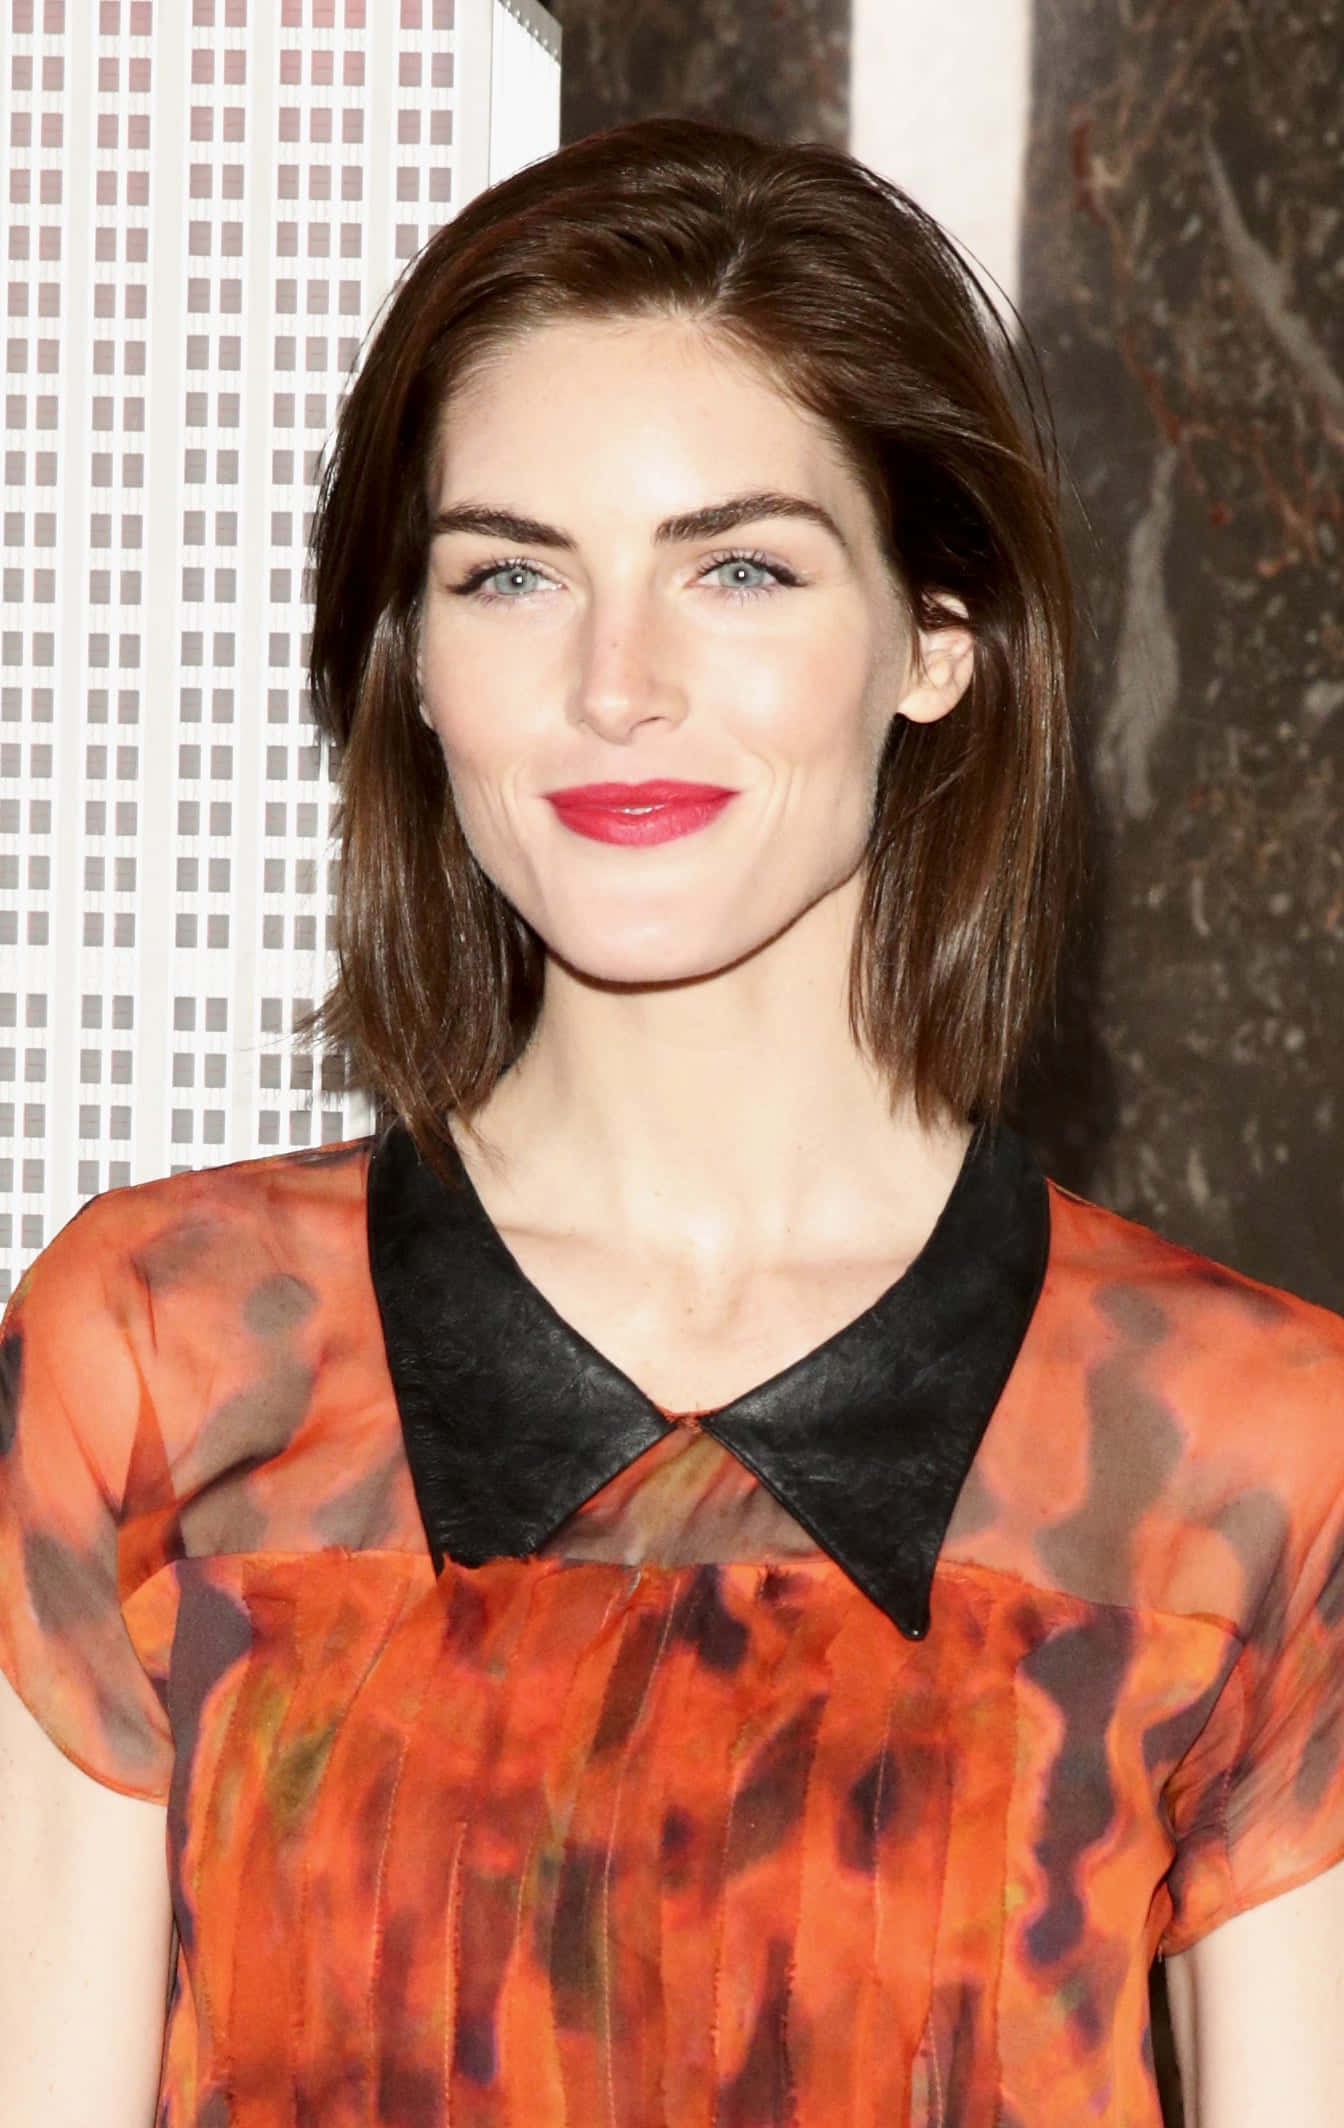 Hilary Rhoda Striking A Pose In A Sophisticated Outfit Wallpaper